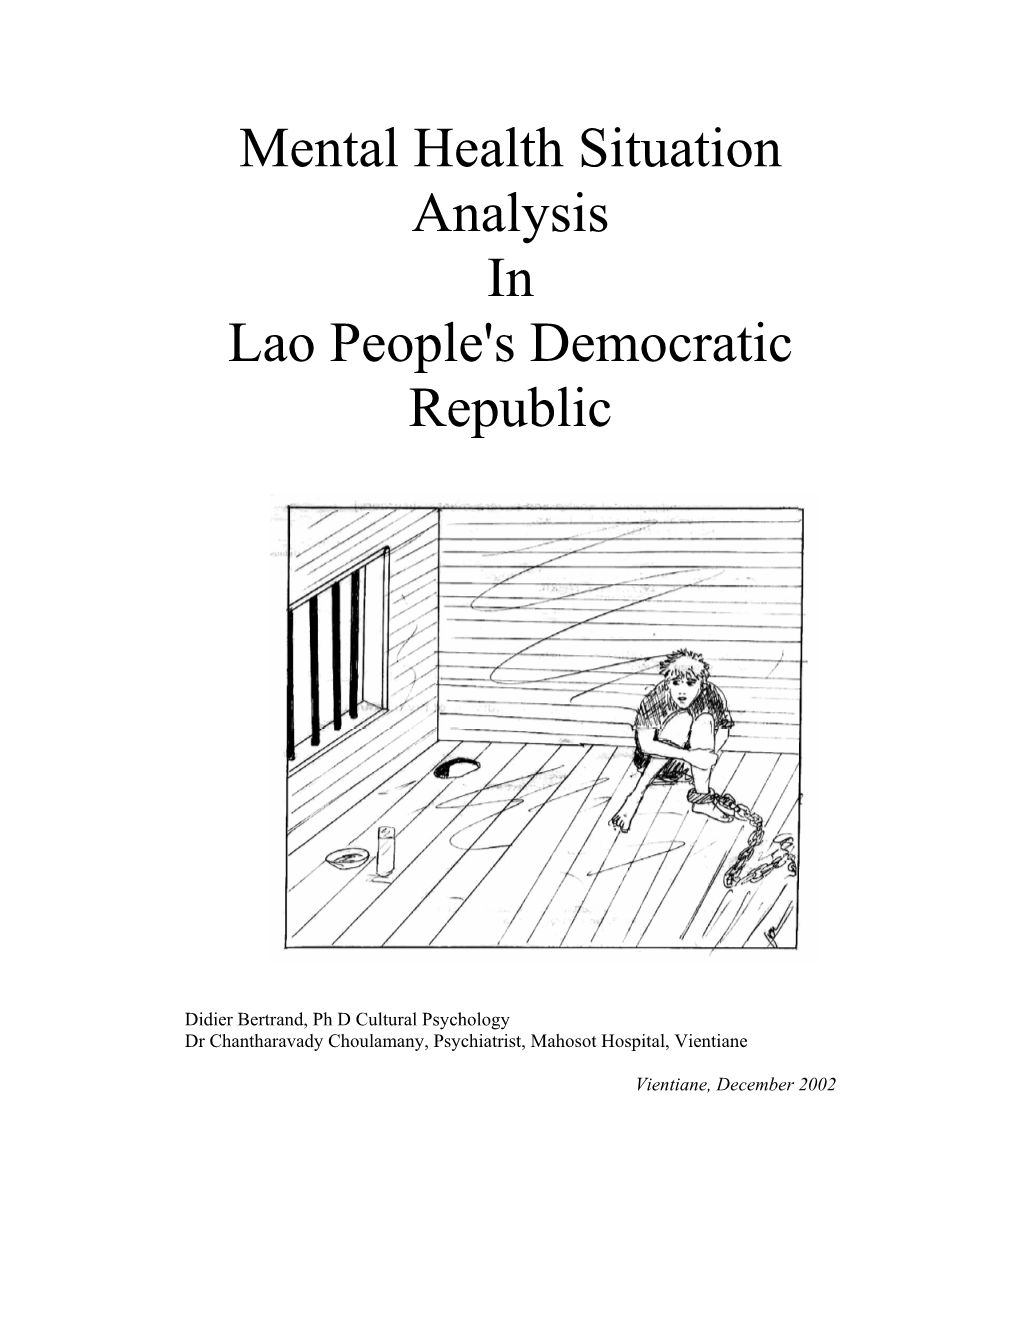 Mental Health Situation Analysis in Lao People's Democratic Republic